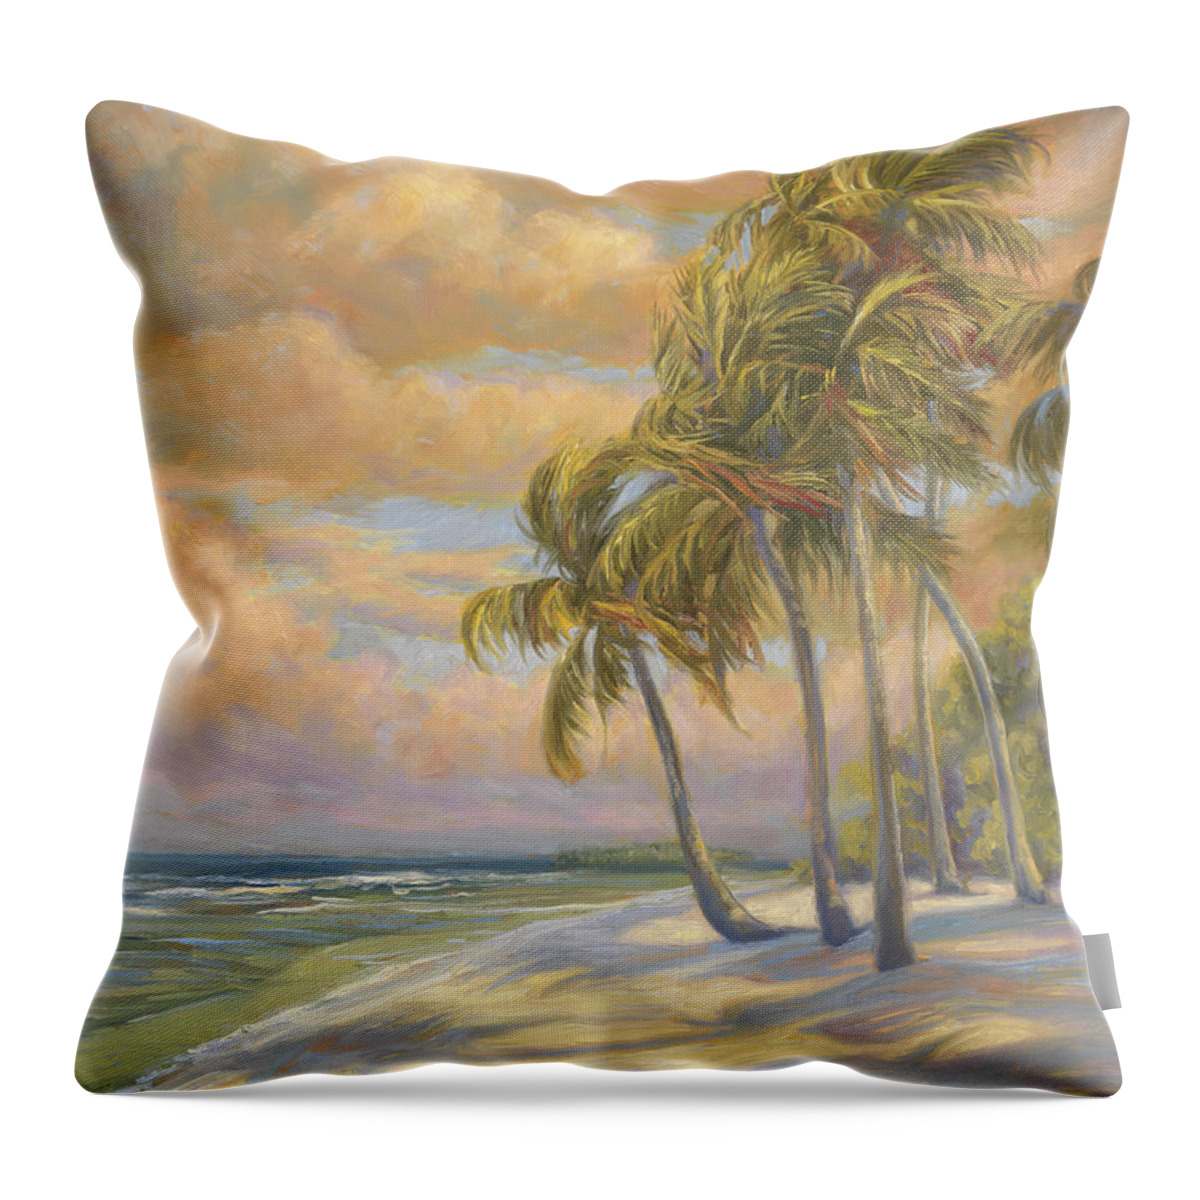 Beach Throw Pillow featuring the painting Ocean Breeze by Lucie Bilodeau